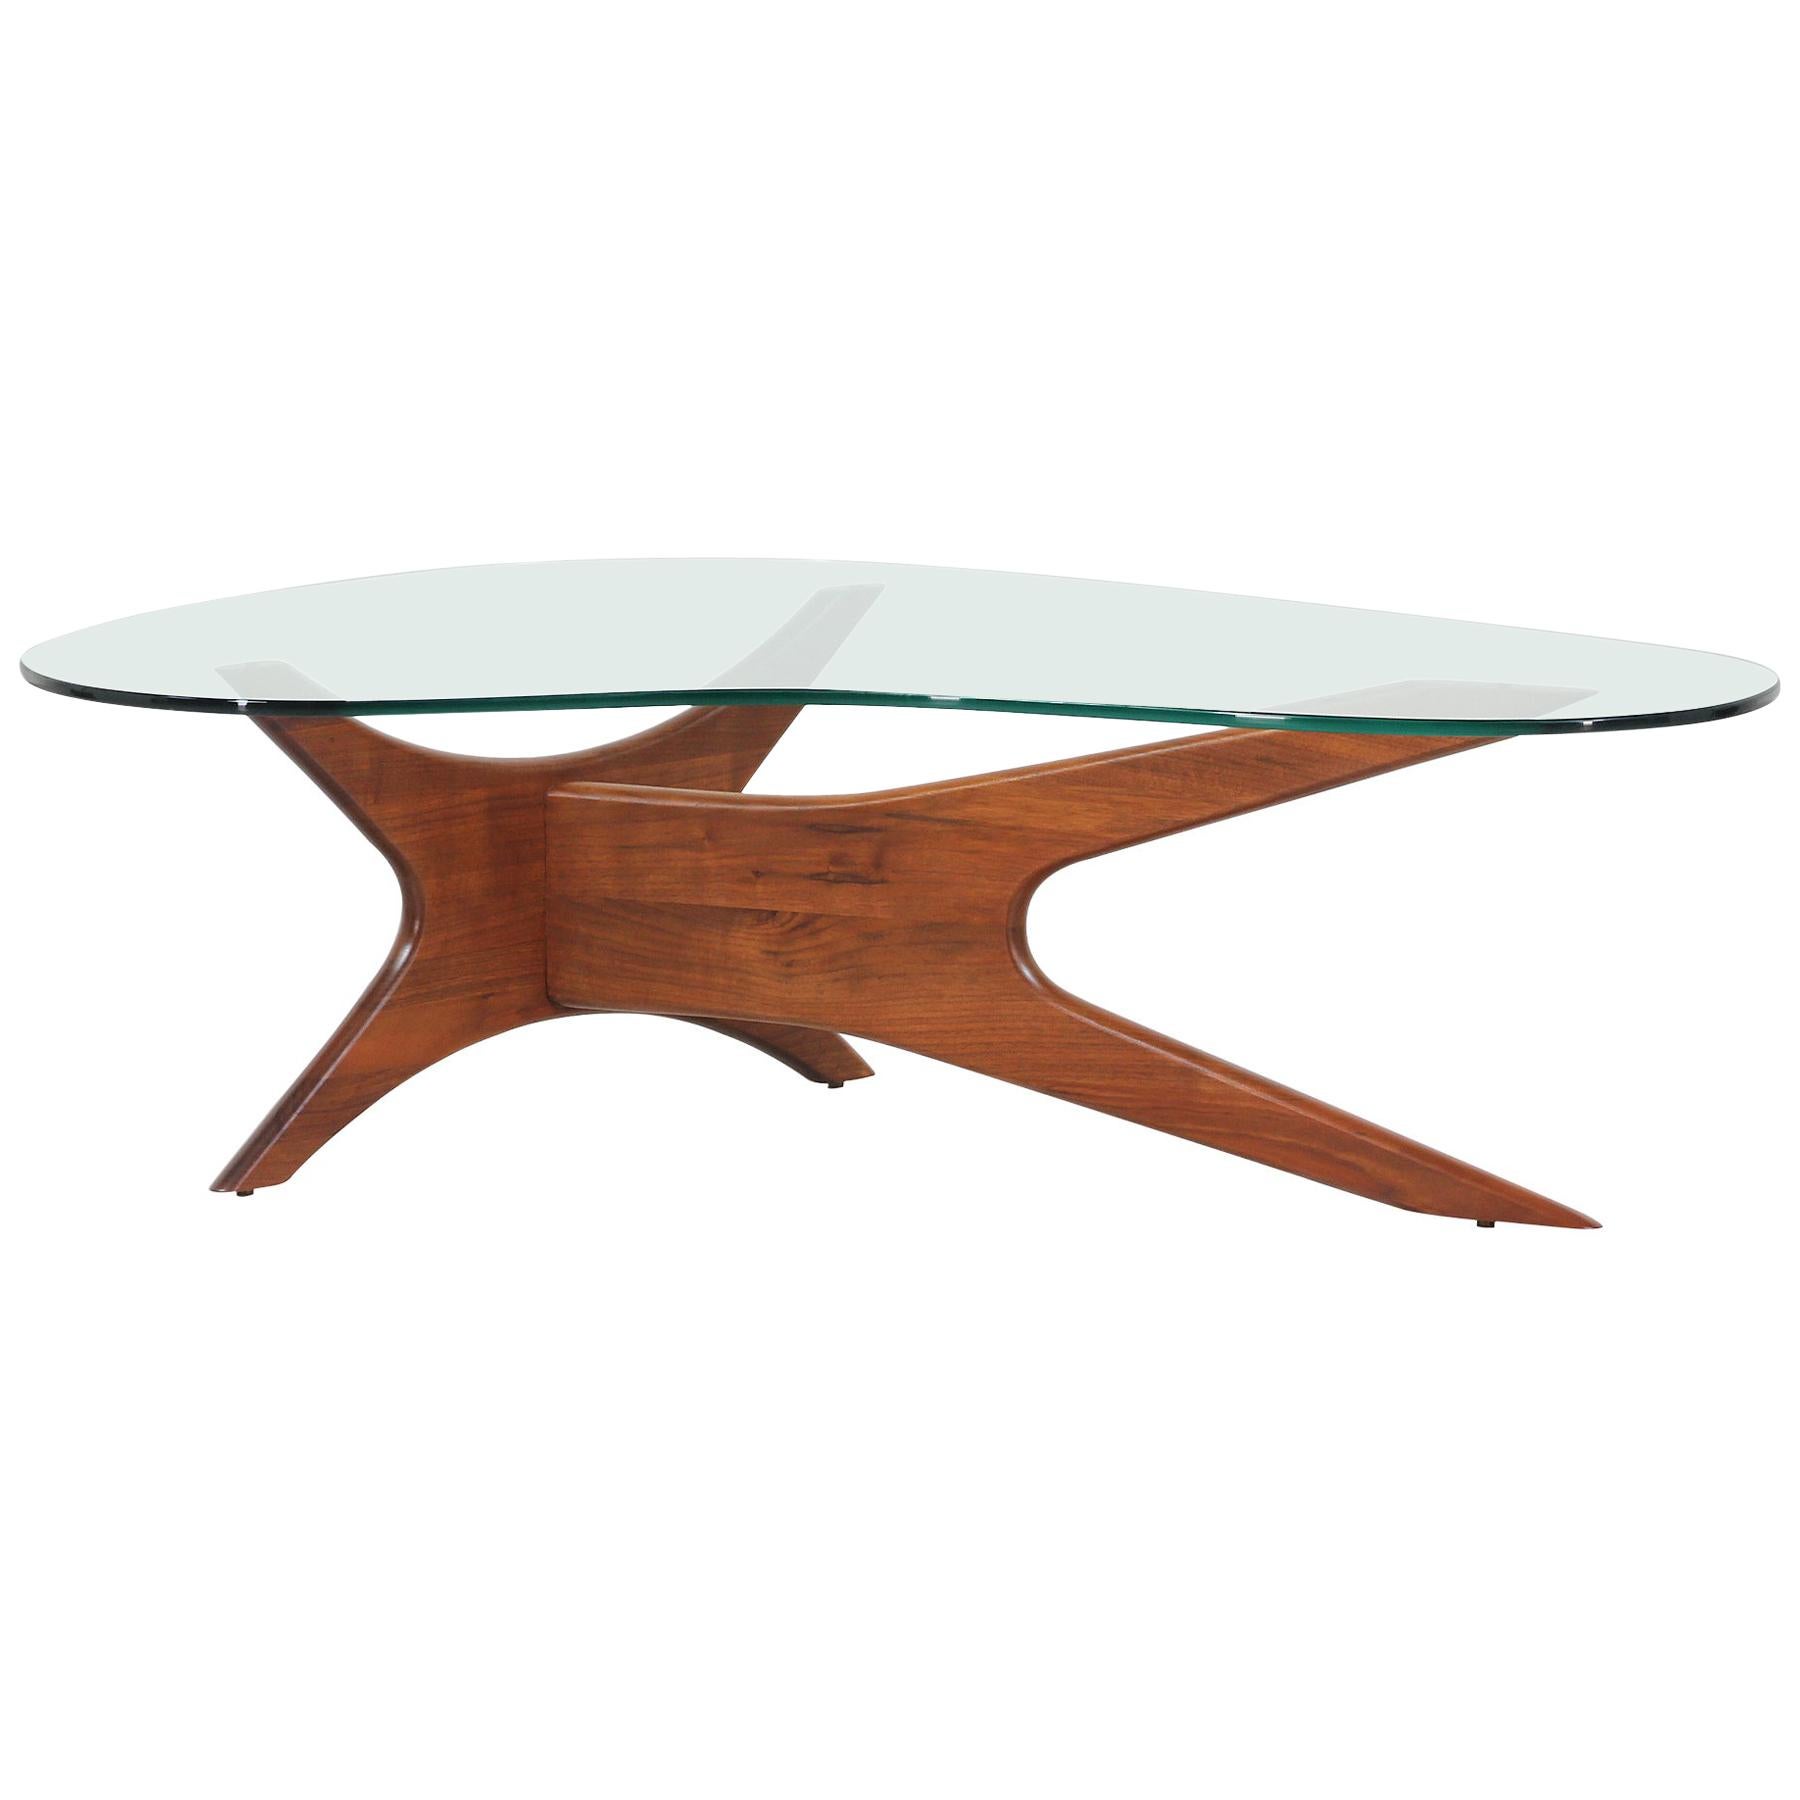 Adrian Pearsall 1465-T Coffee Table for Craft Associates